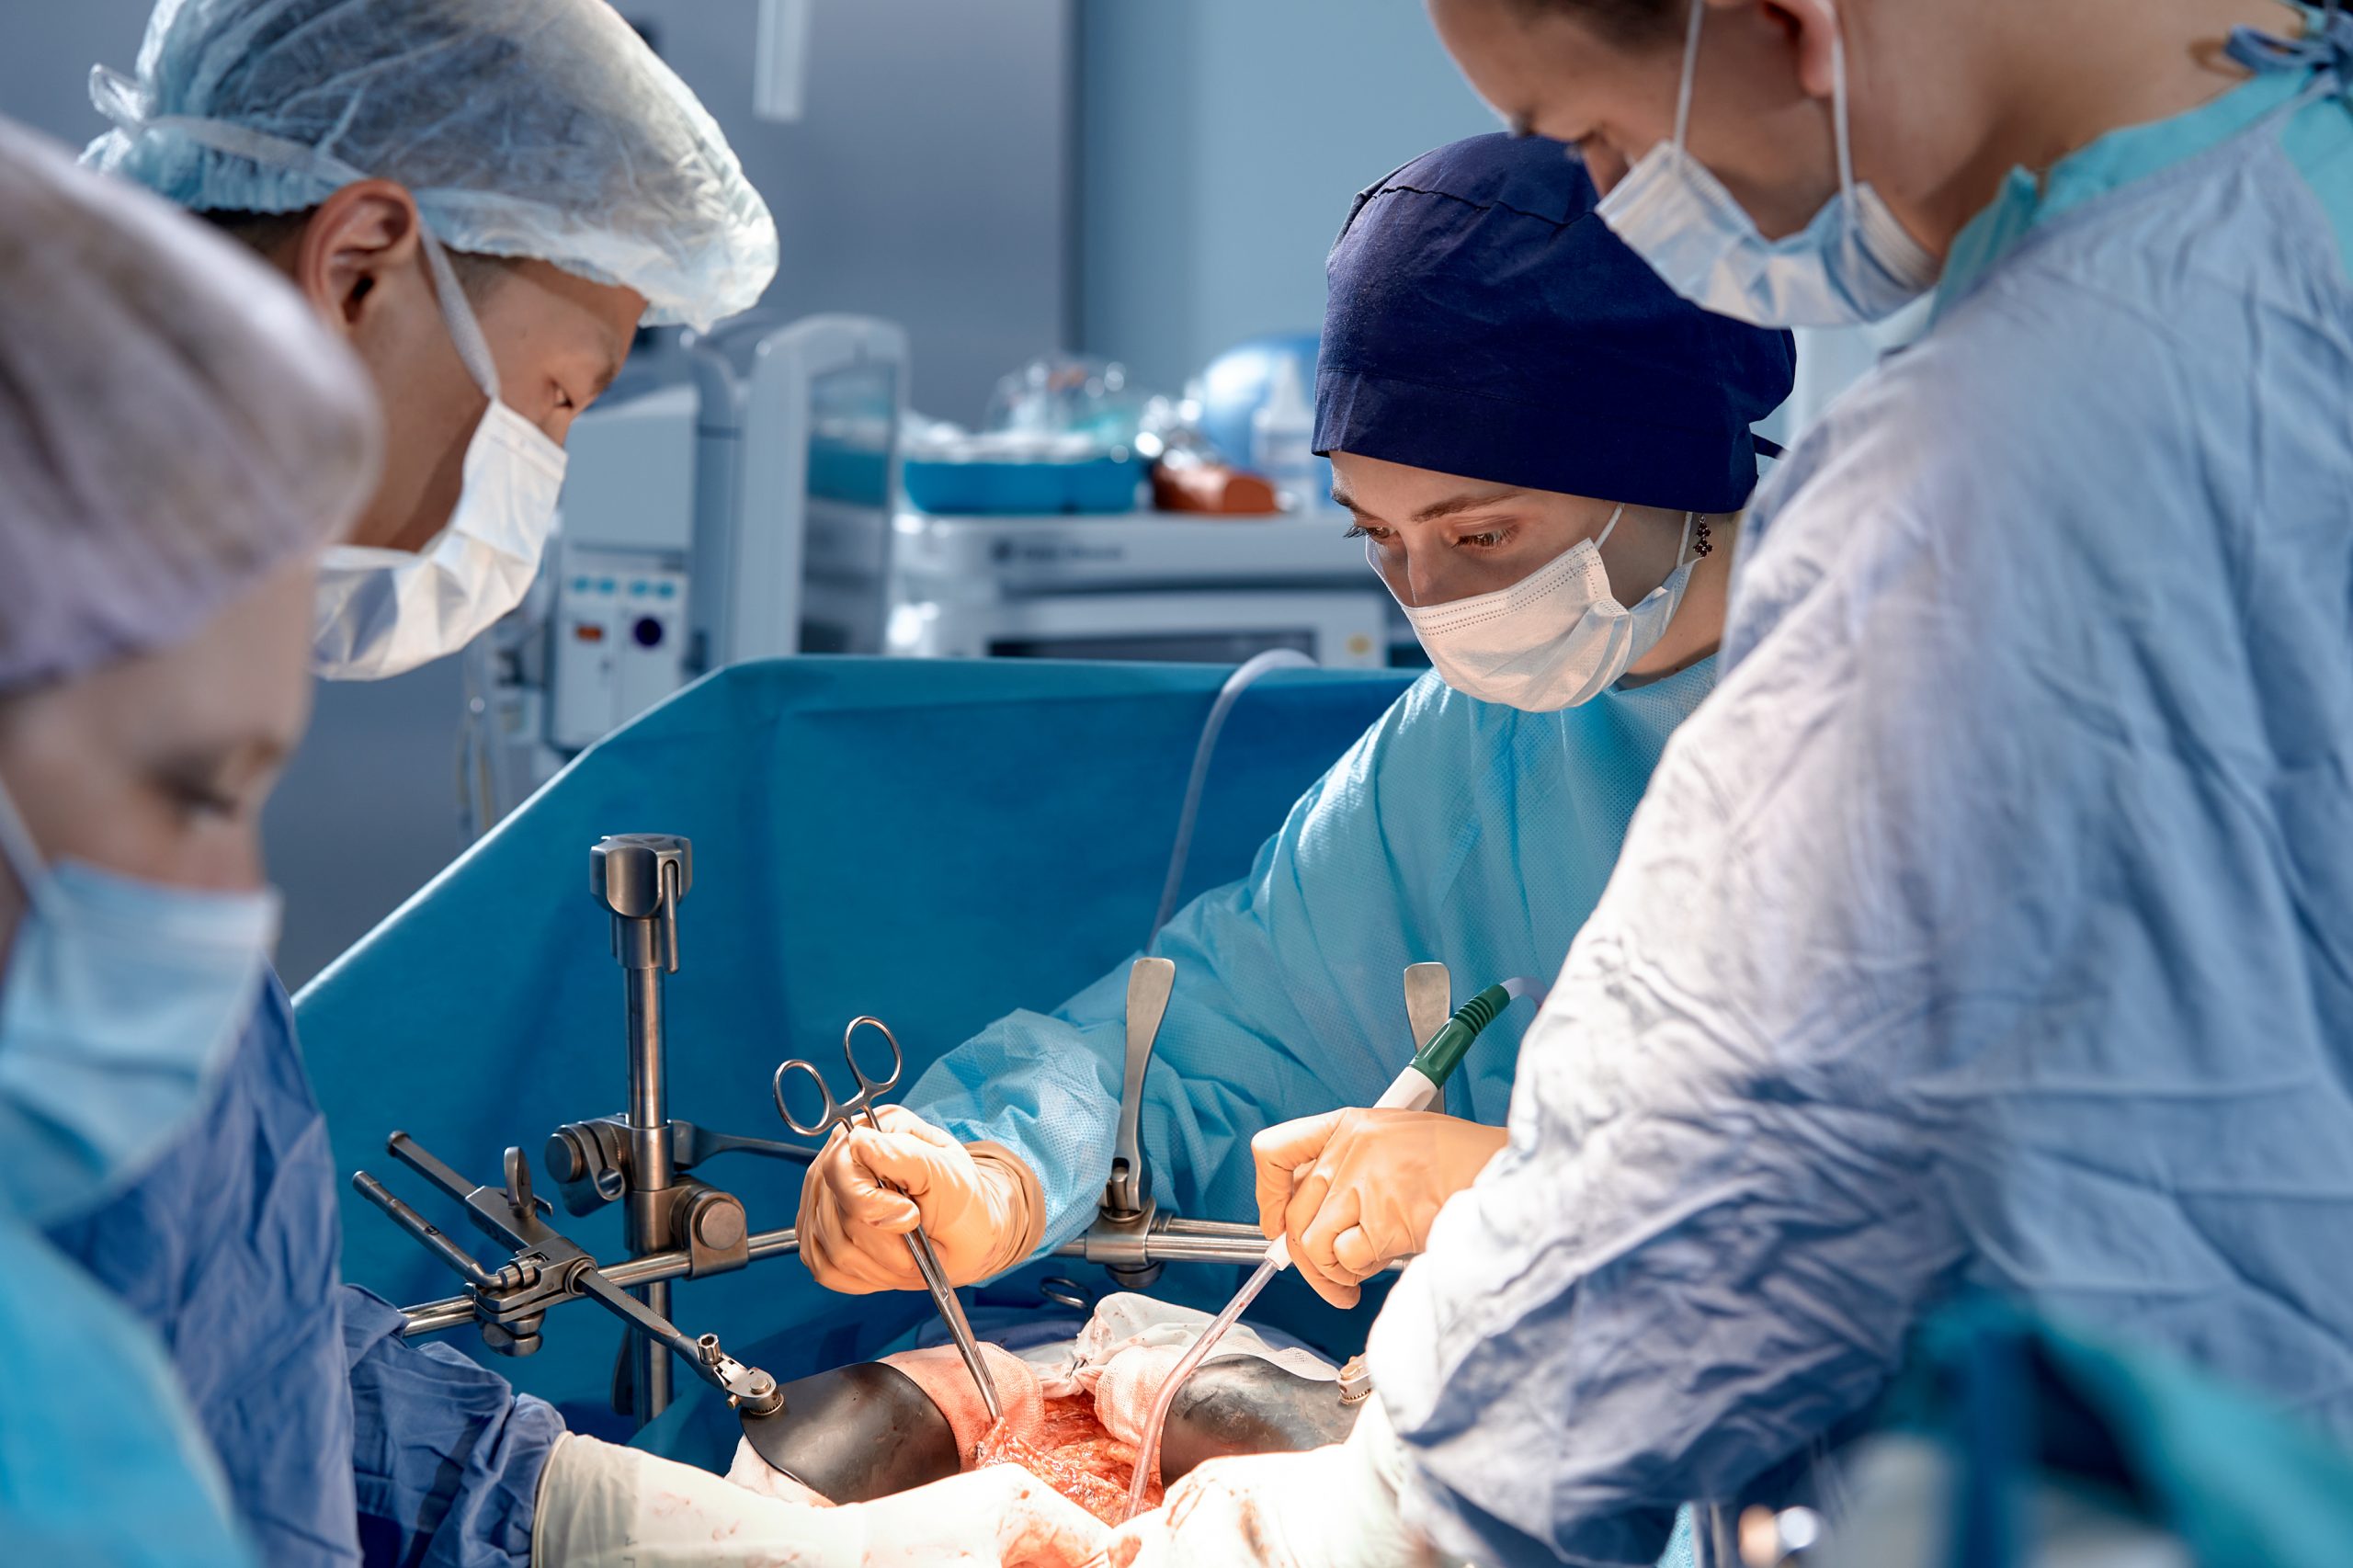 Team of surgeons carefully performing surgery using precise instruments in the operating room save the life of the patient, clear teamwork.